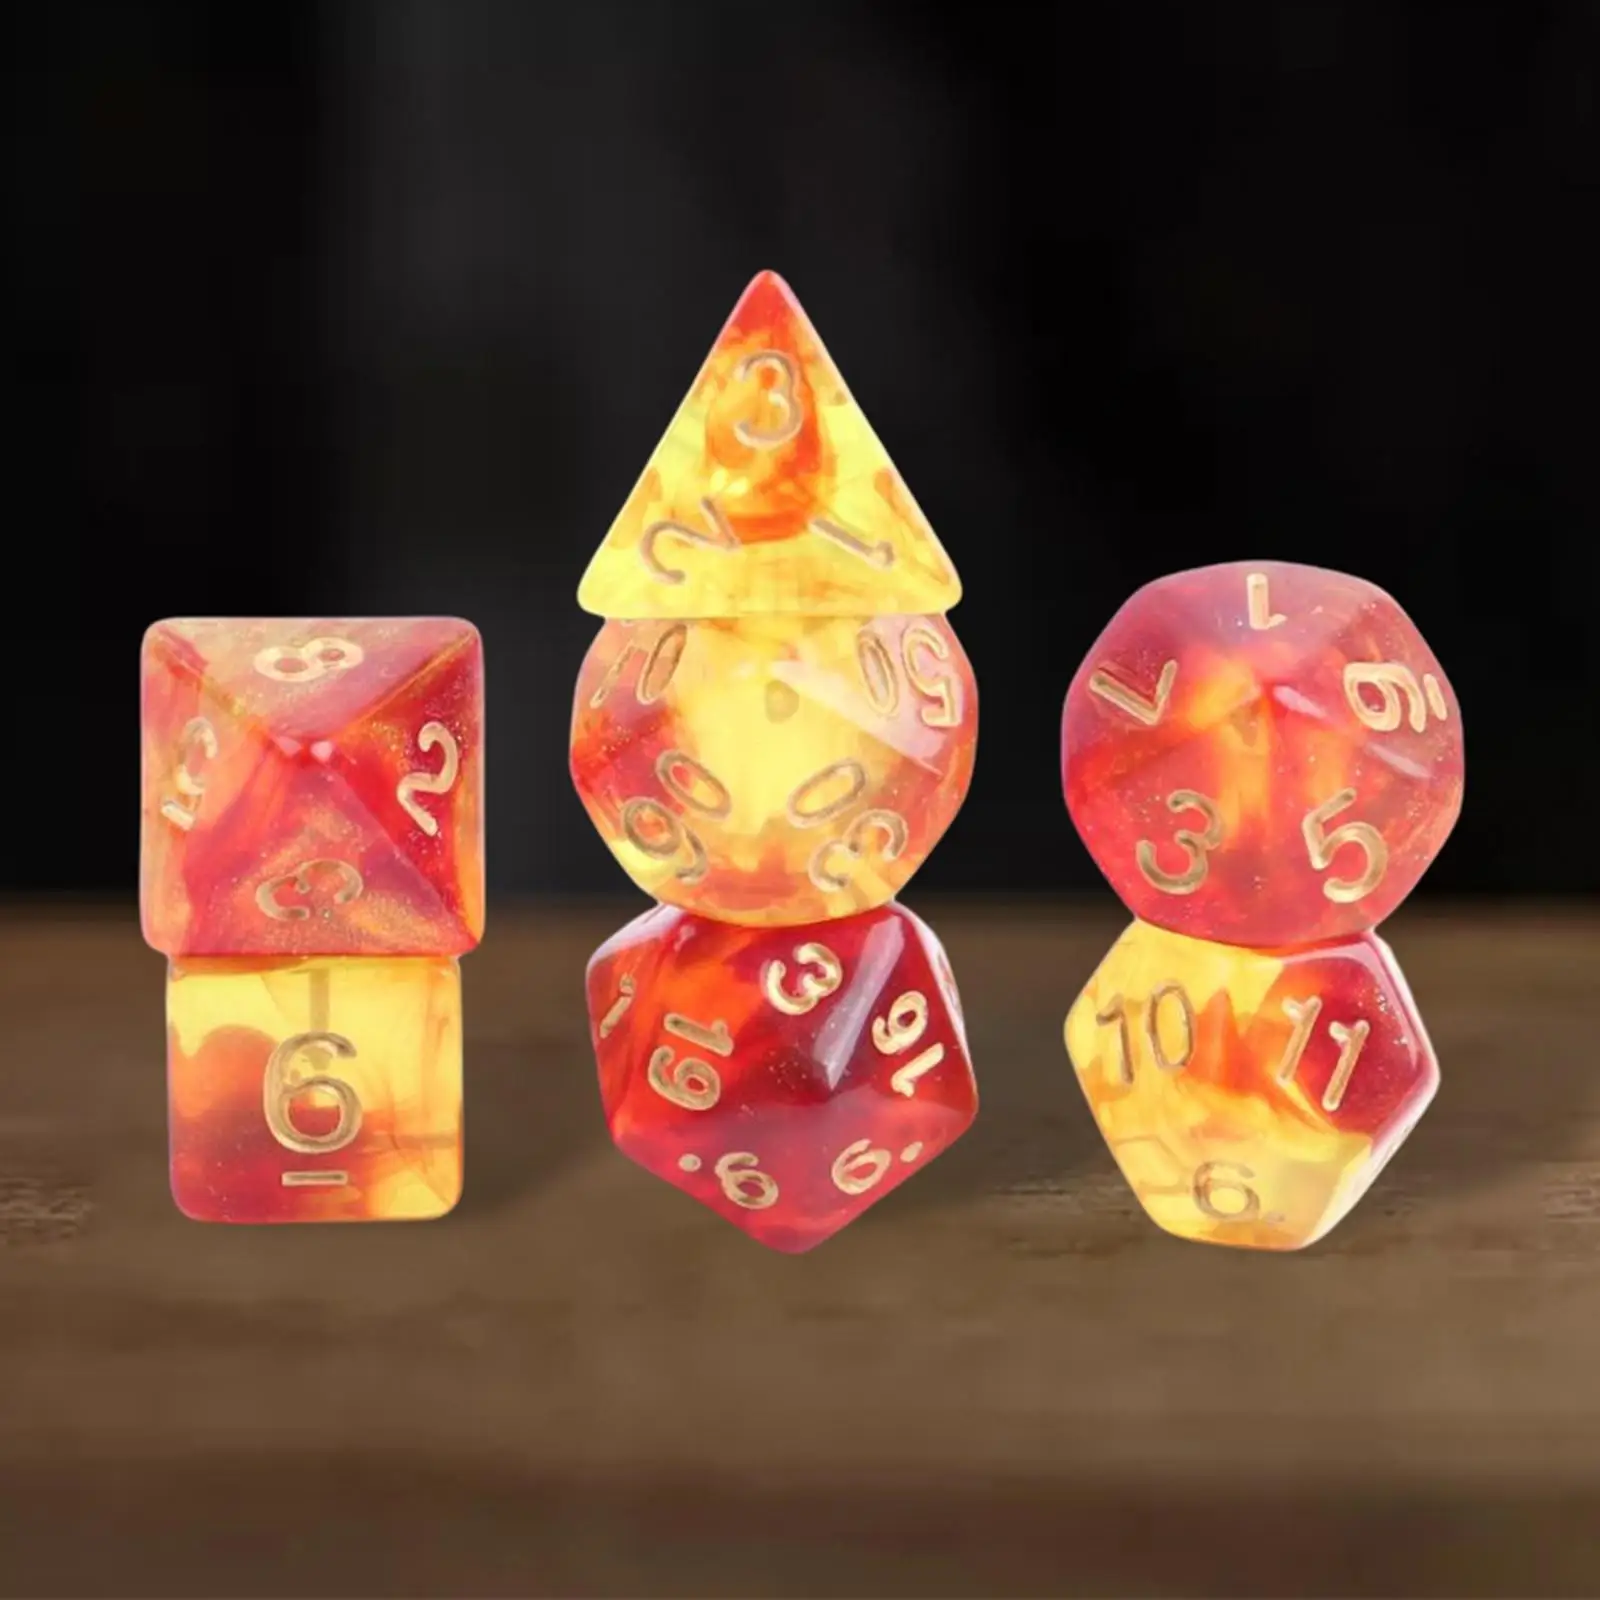 7Die Set Double Colors Polyhedral  for & RPG  MTG Board Game Accessories